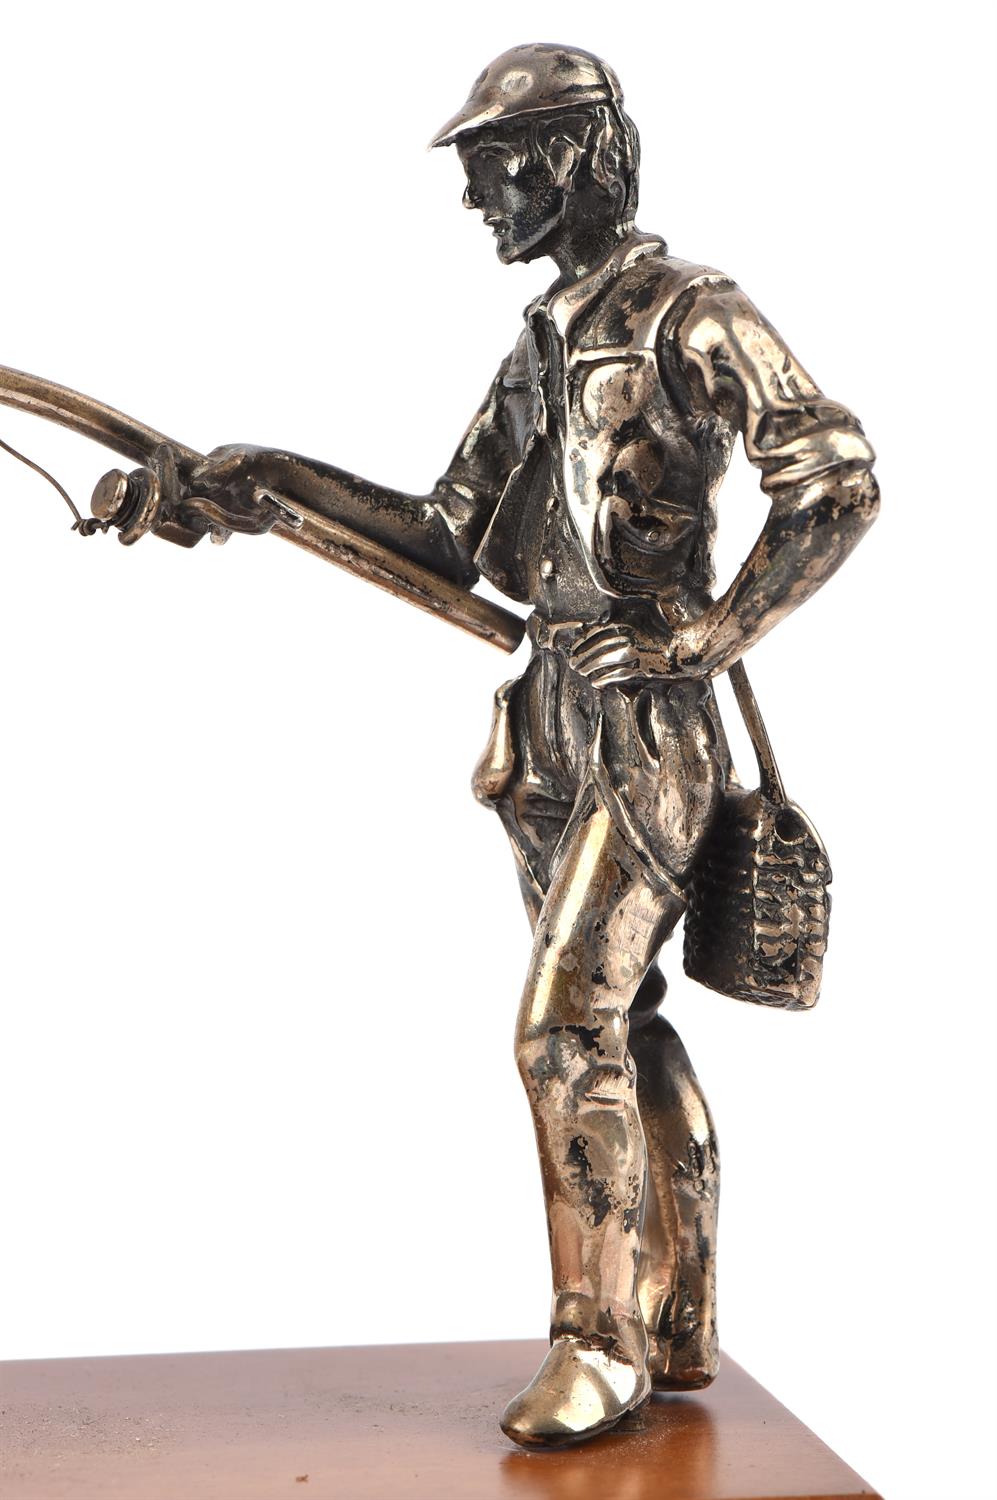 Cast silver figure of a fisherman holding a rod with fish on line by M & SJ import, London, 1860 - Image 2 of 3